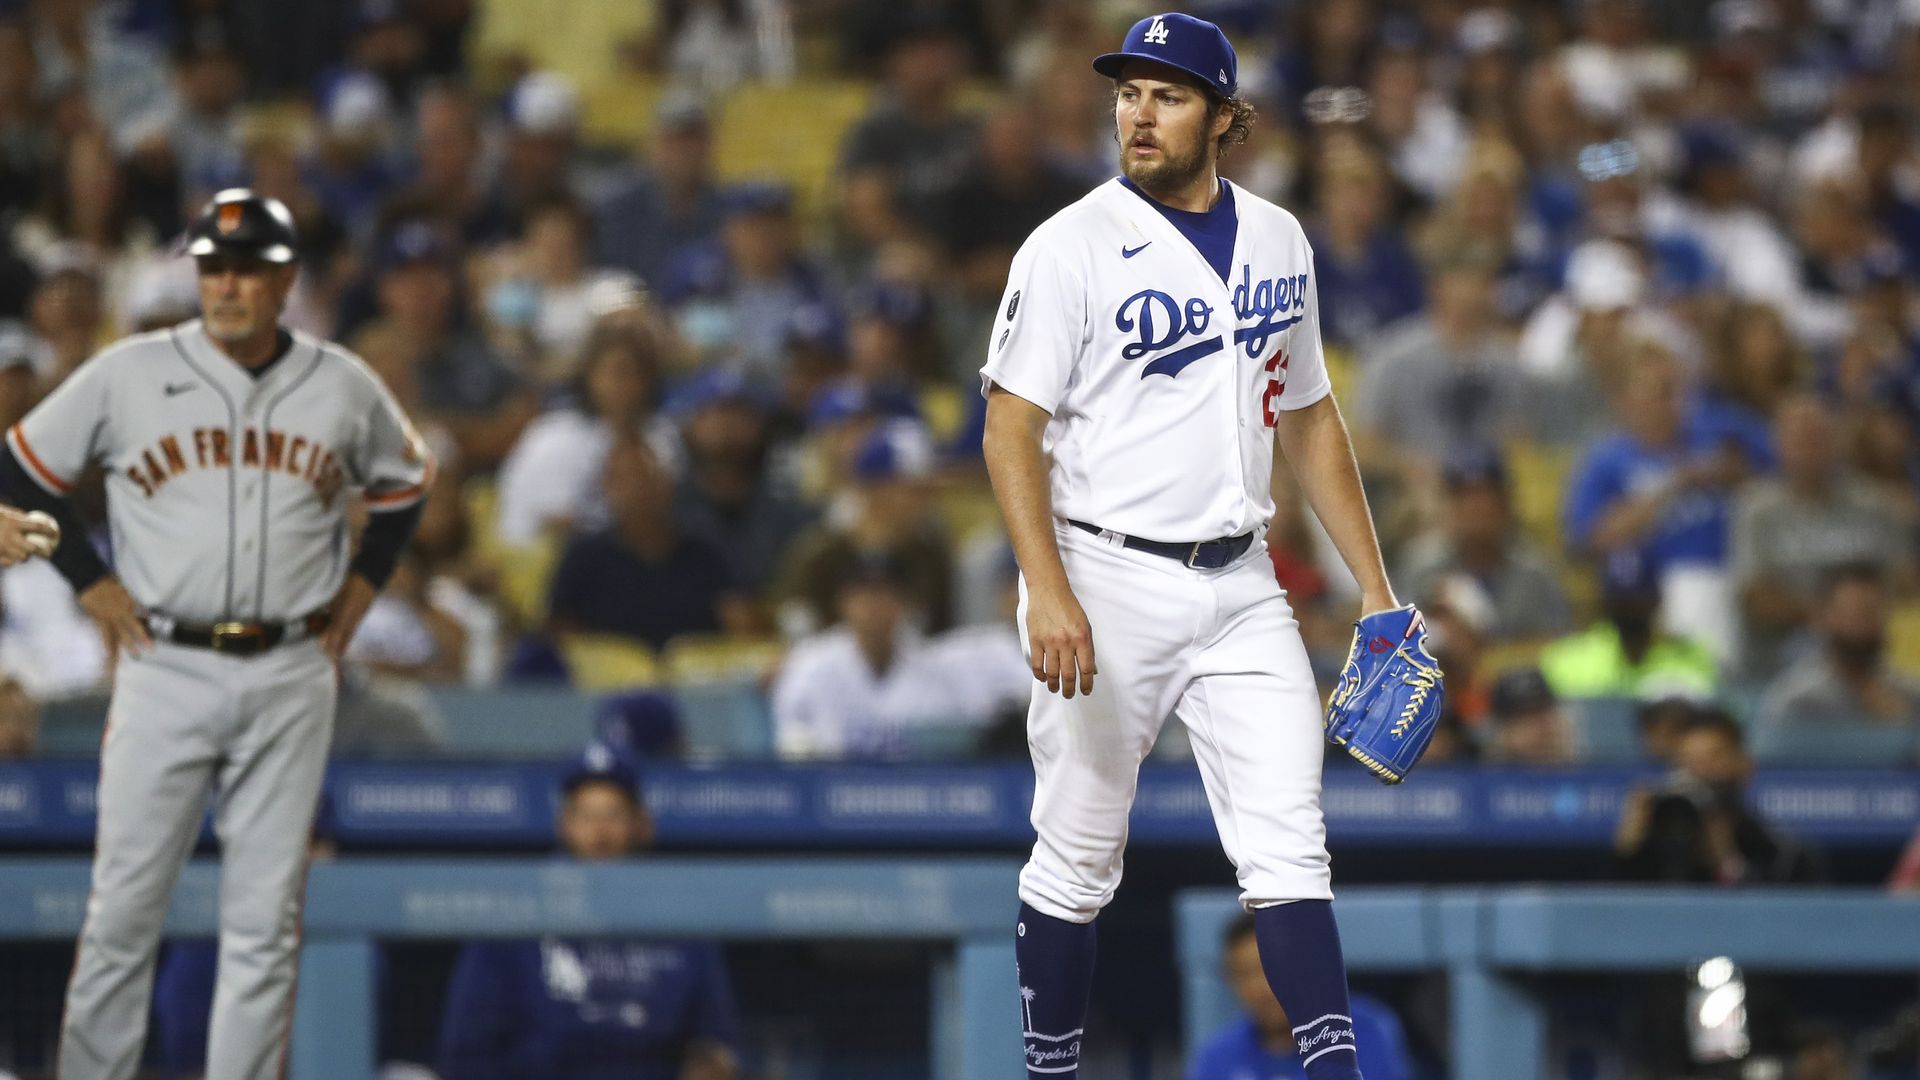 Dodgers pitcher Trevor Bauer to remain on leave through rest of season 